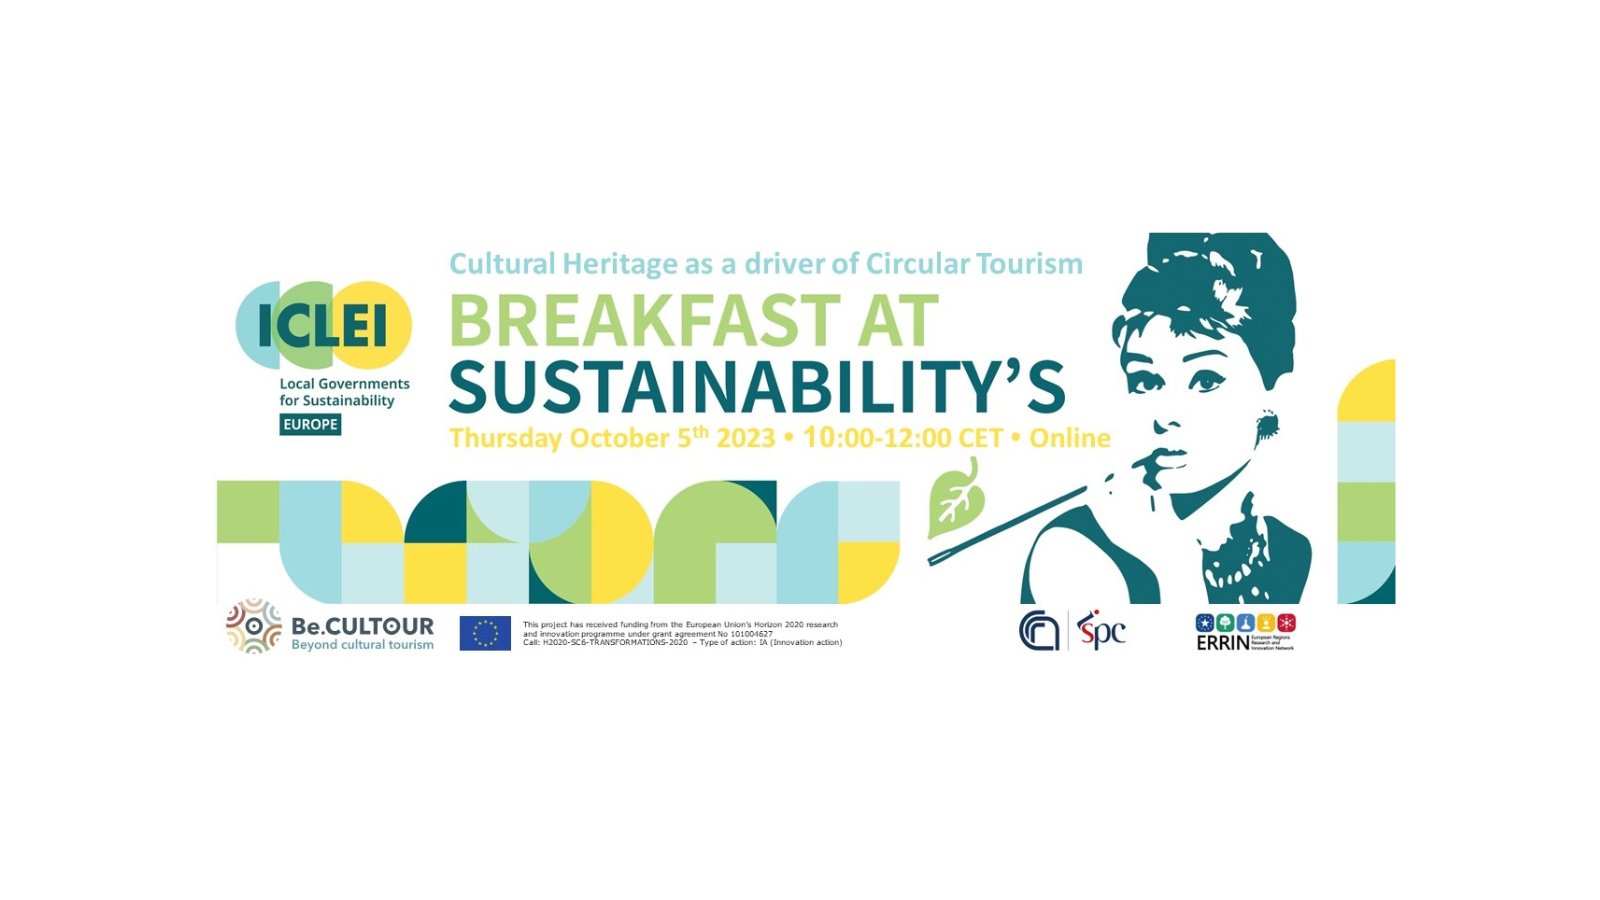 ICLEI Breakfast @ Sustainability's event on circular cultural tourism